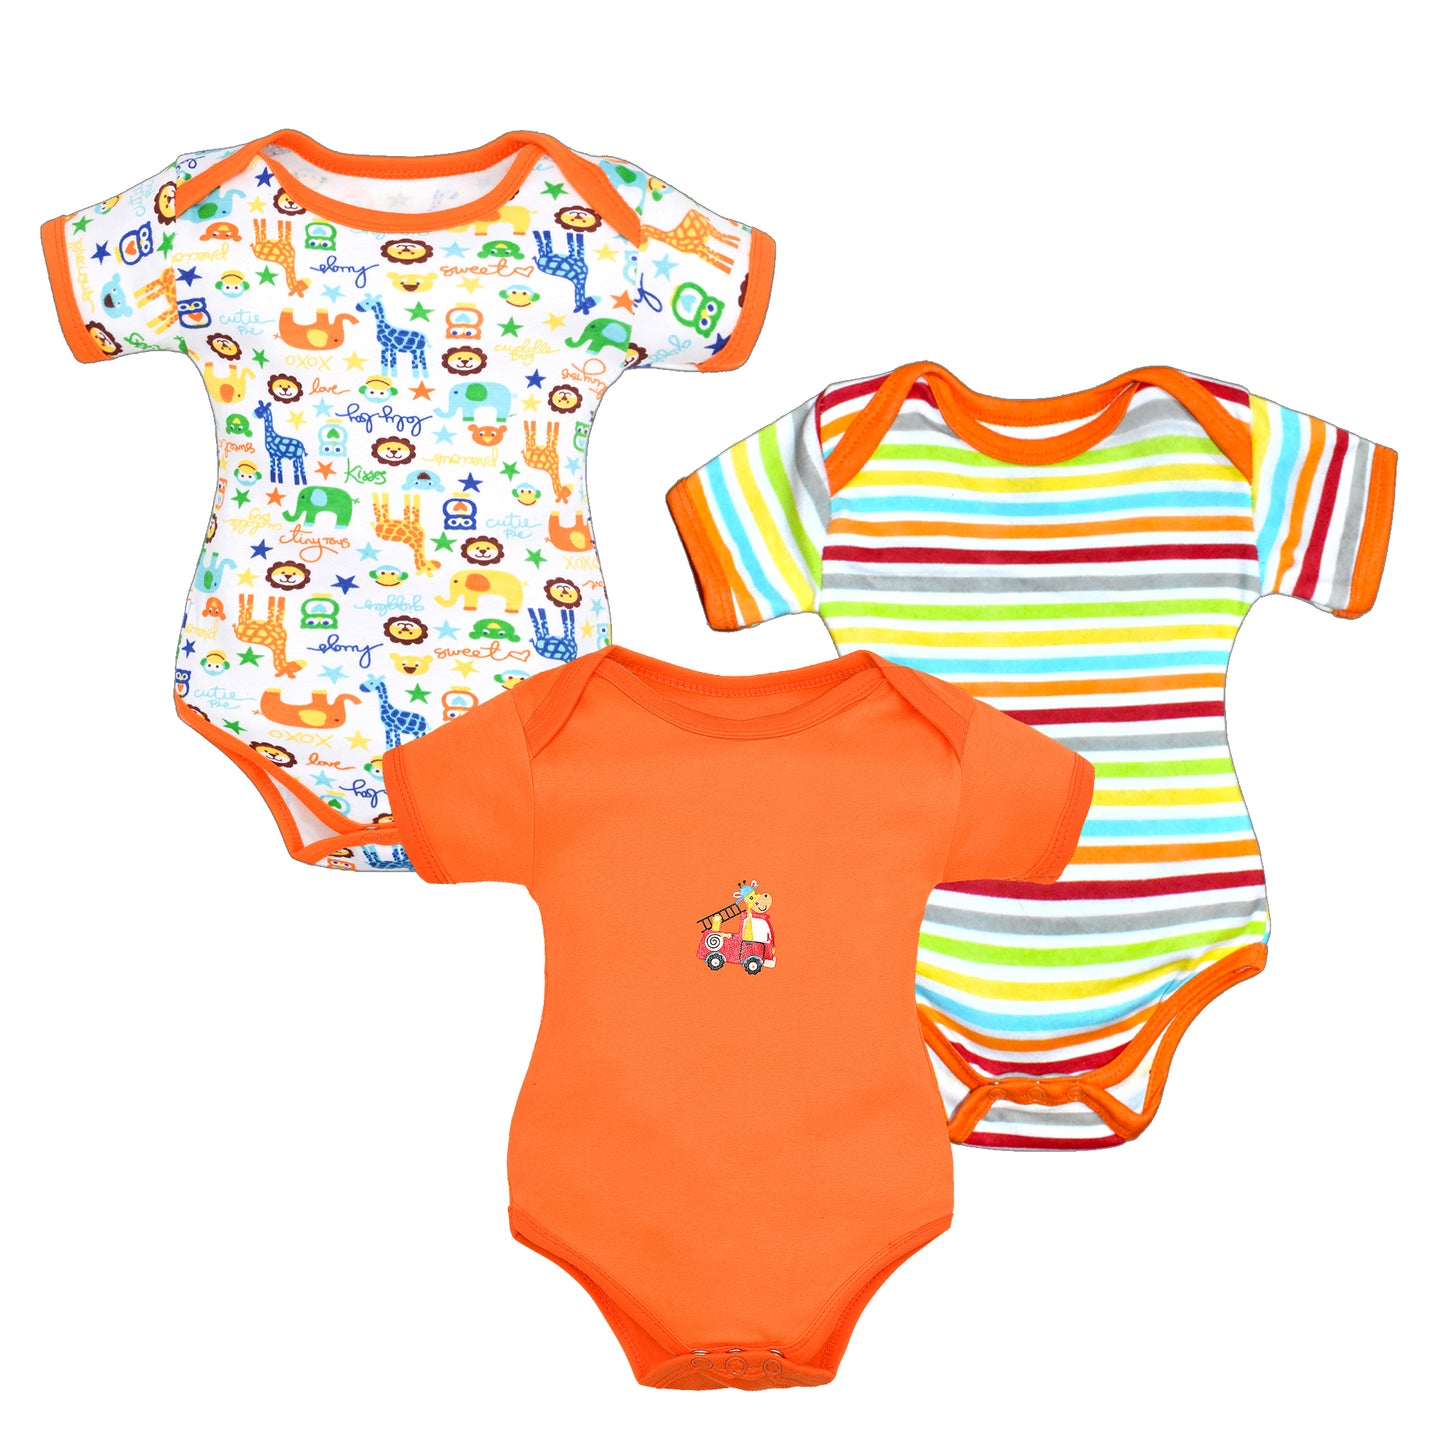 Bodice Half Sleeves Baby Romper Body Suits Jump Suit for Boys and Girls Set of 3 (Orange)